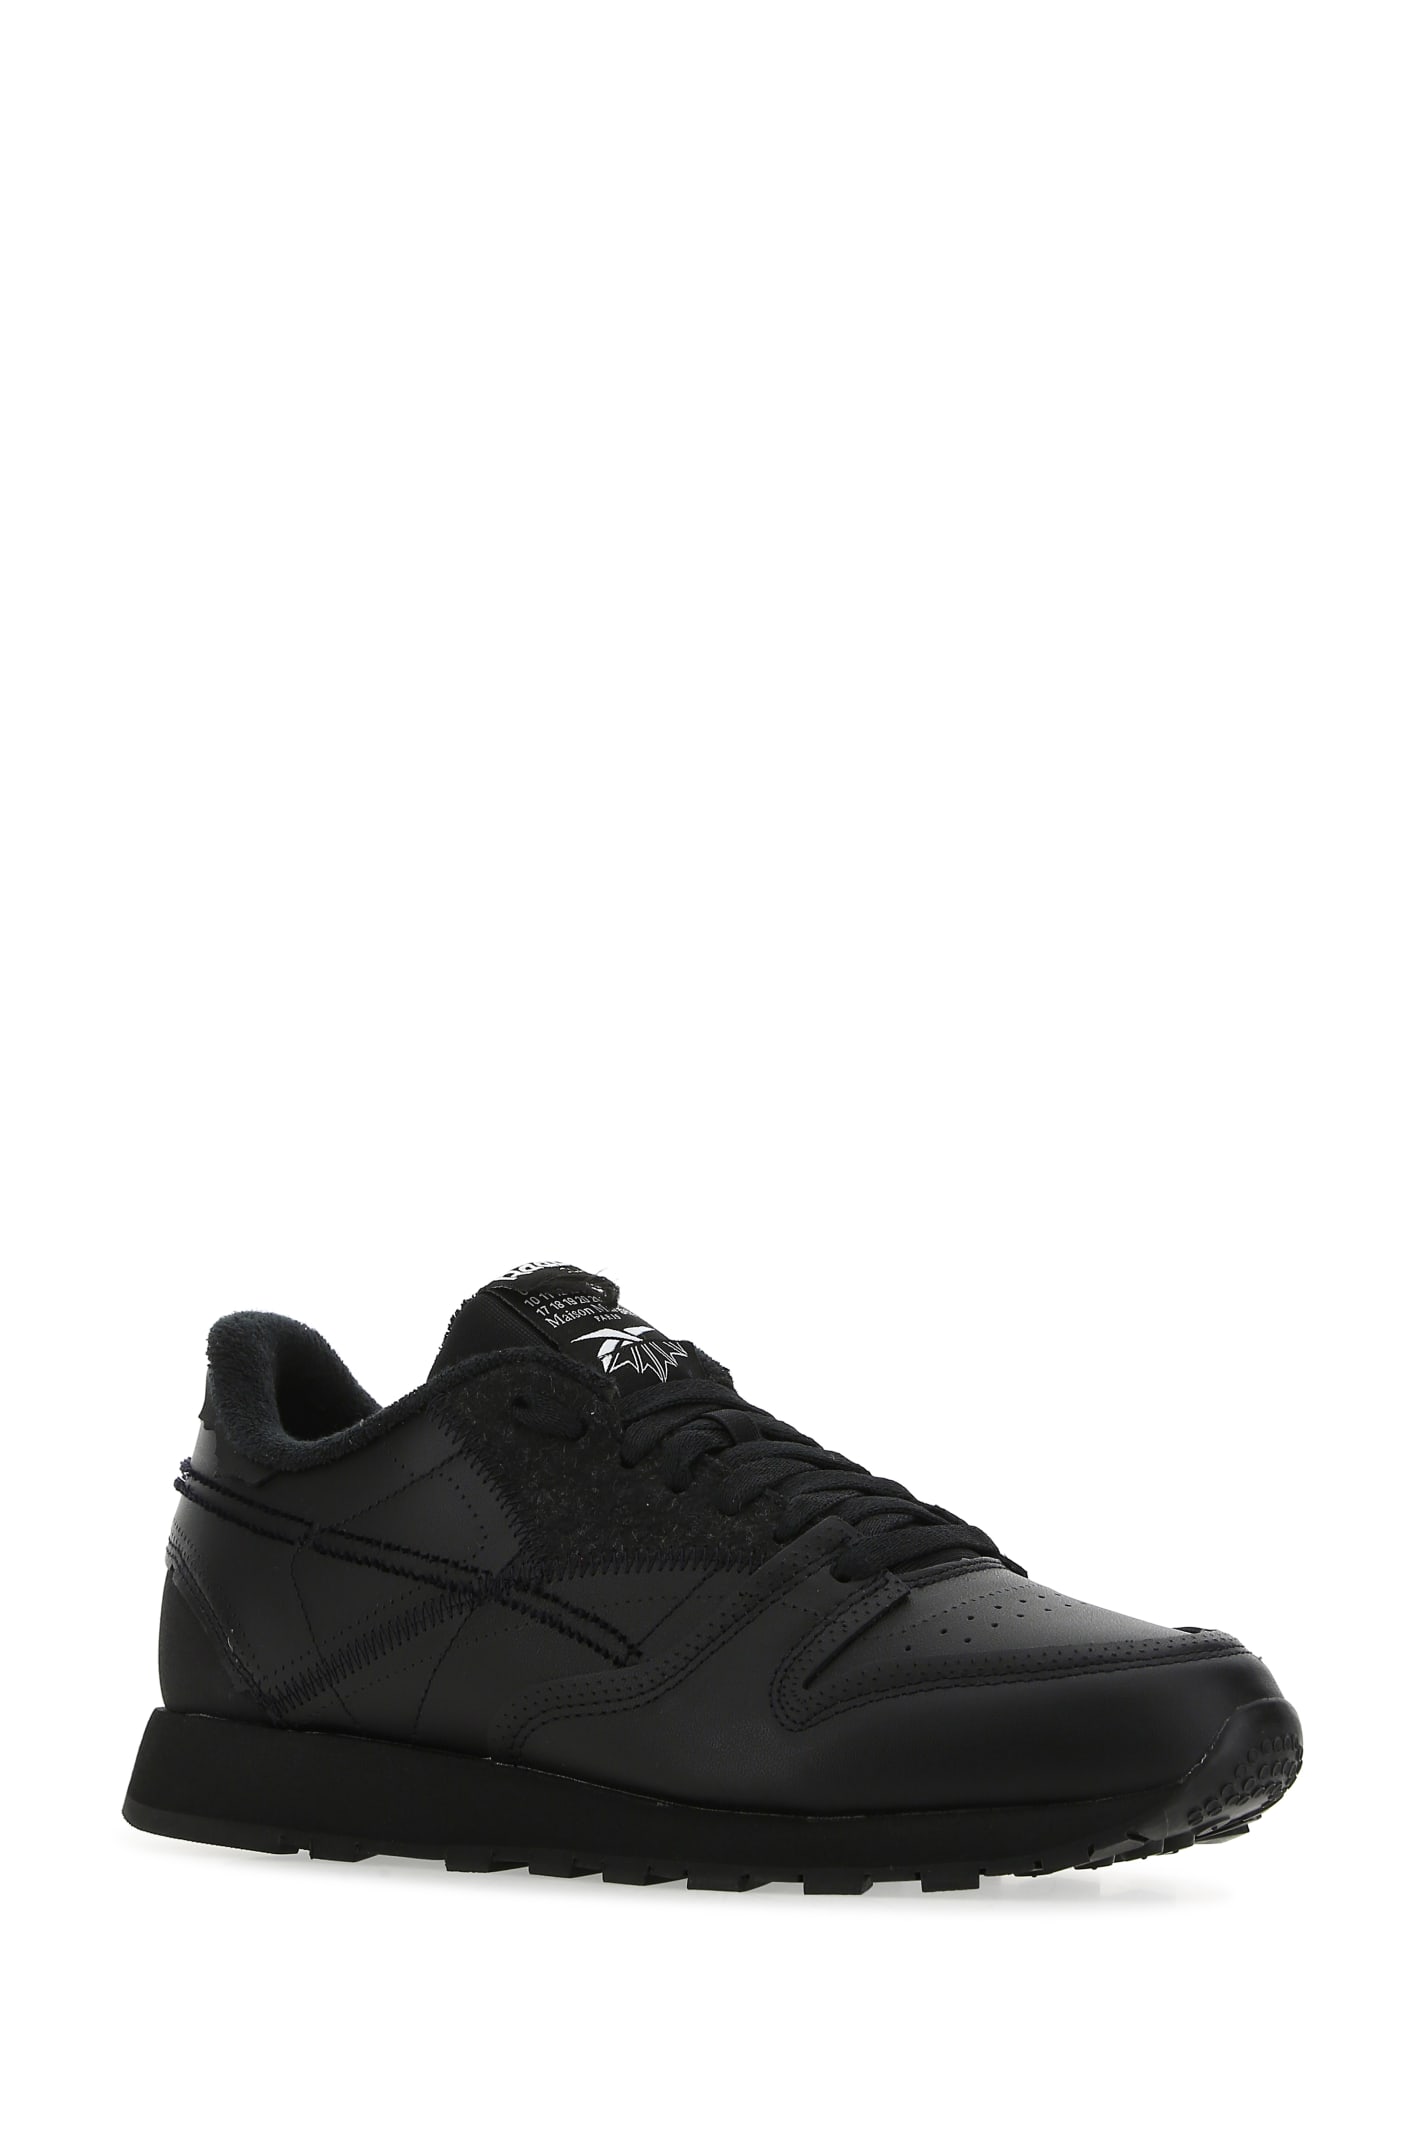 Reebok Black Leather And Fabric Project 0 Cl Memory Of Sneakers In Blackftwwhtblack